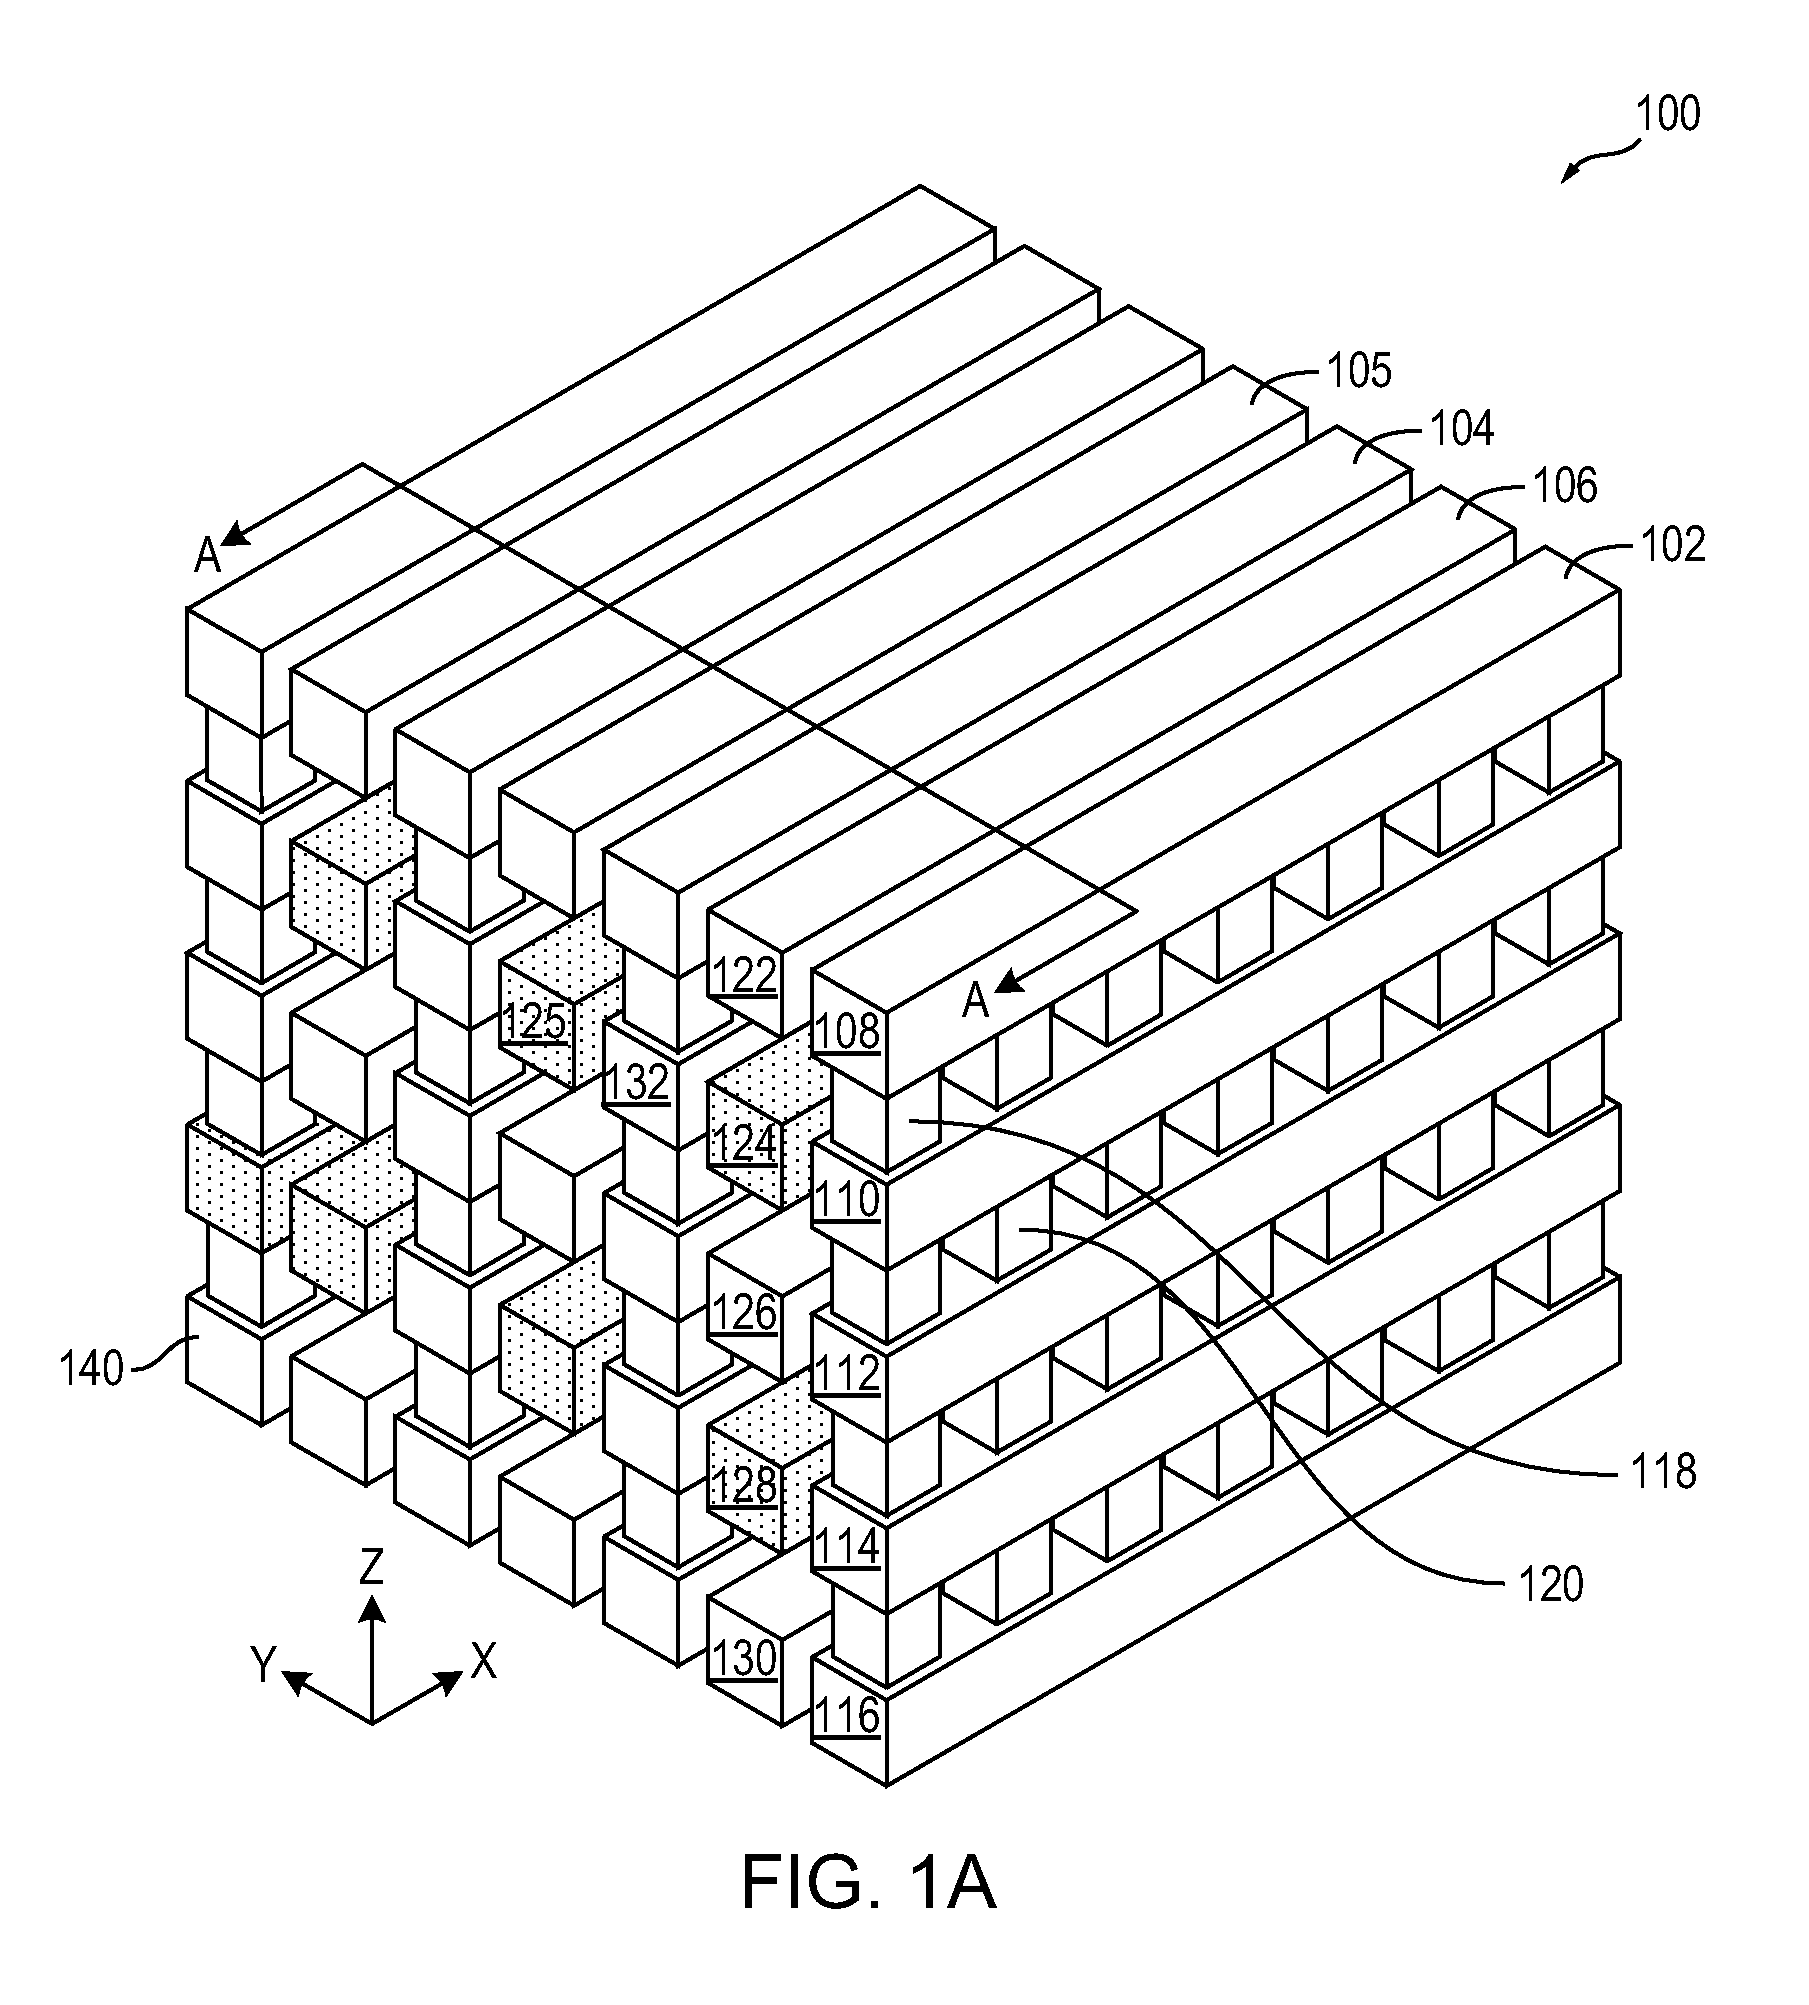 Integrated capacitor with cabled plates